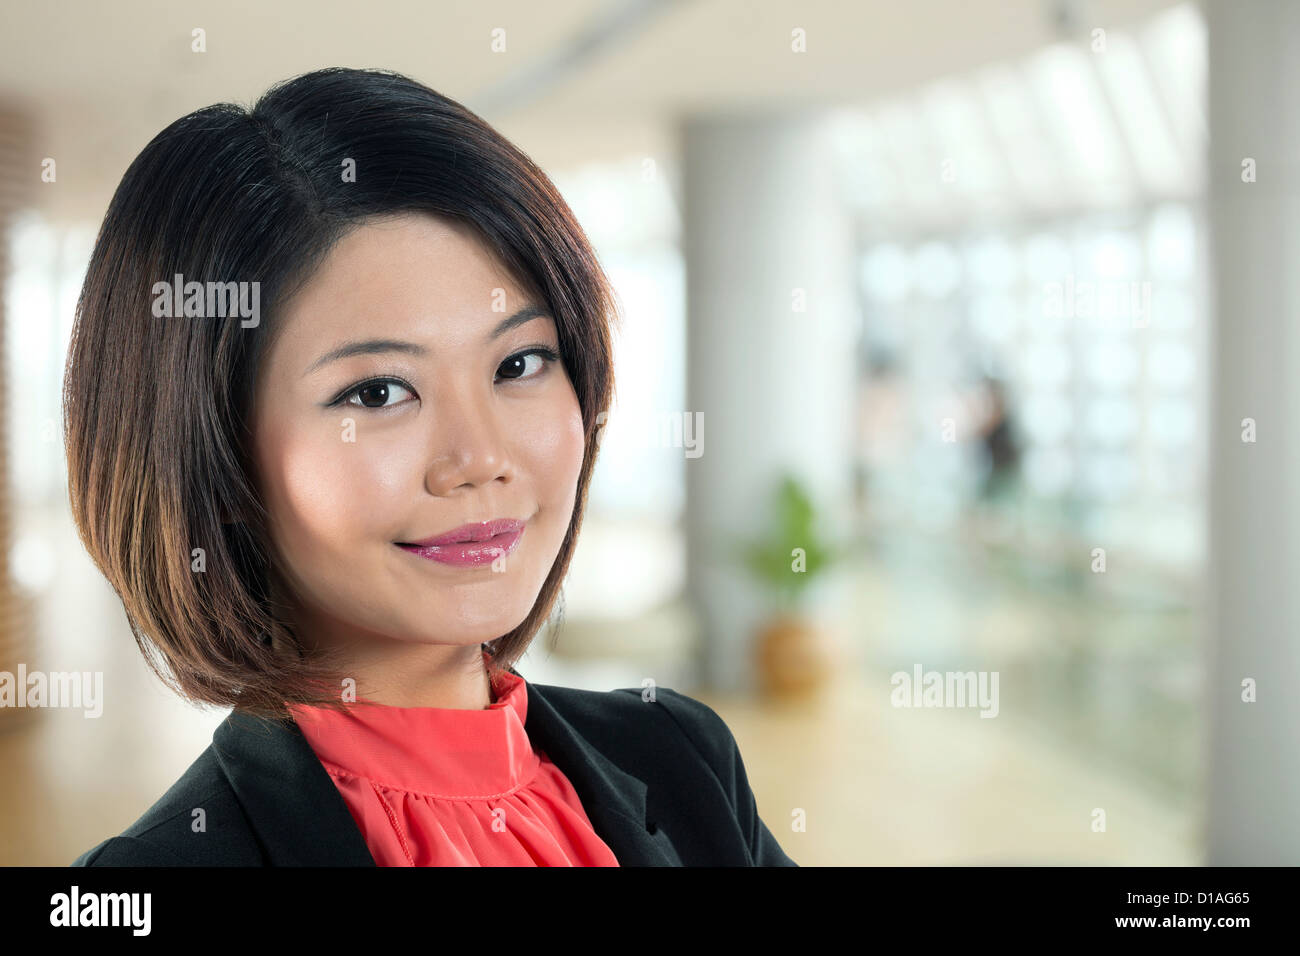 Close up of a Chinese business woman avec sourire amical. Banque D'Images